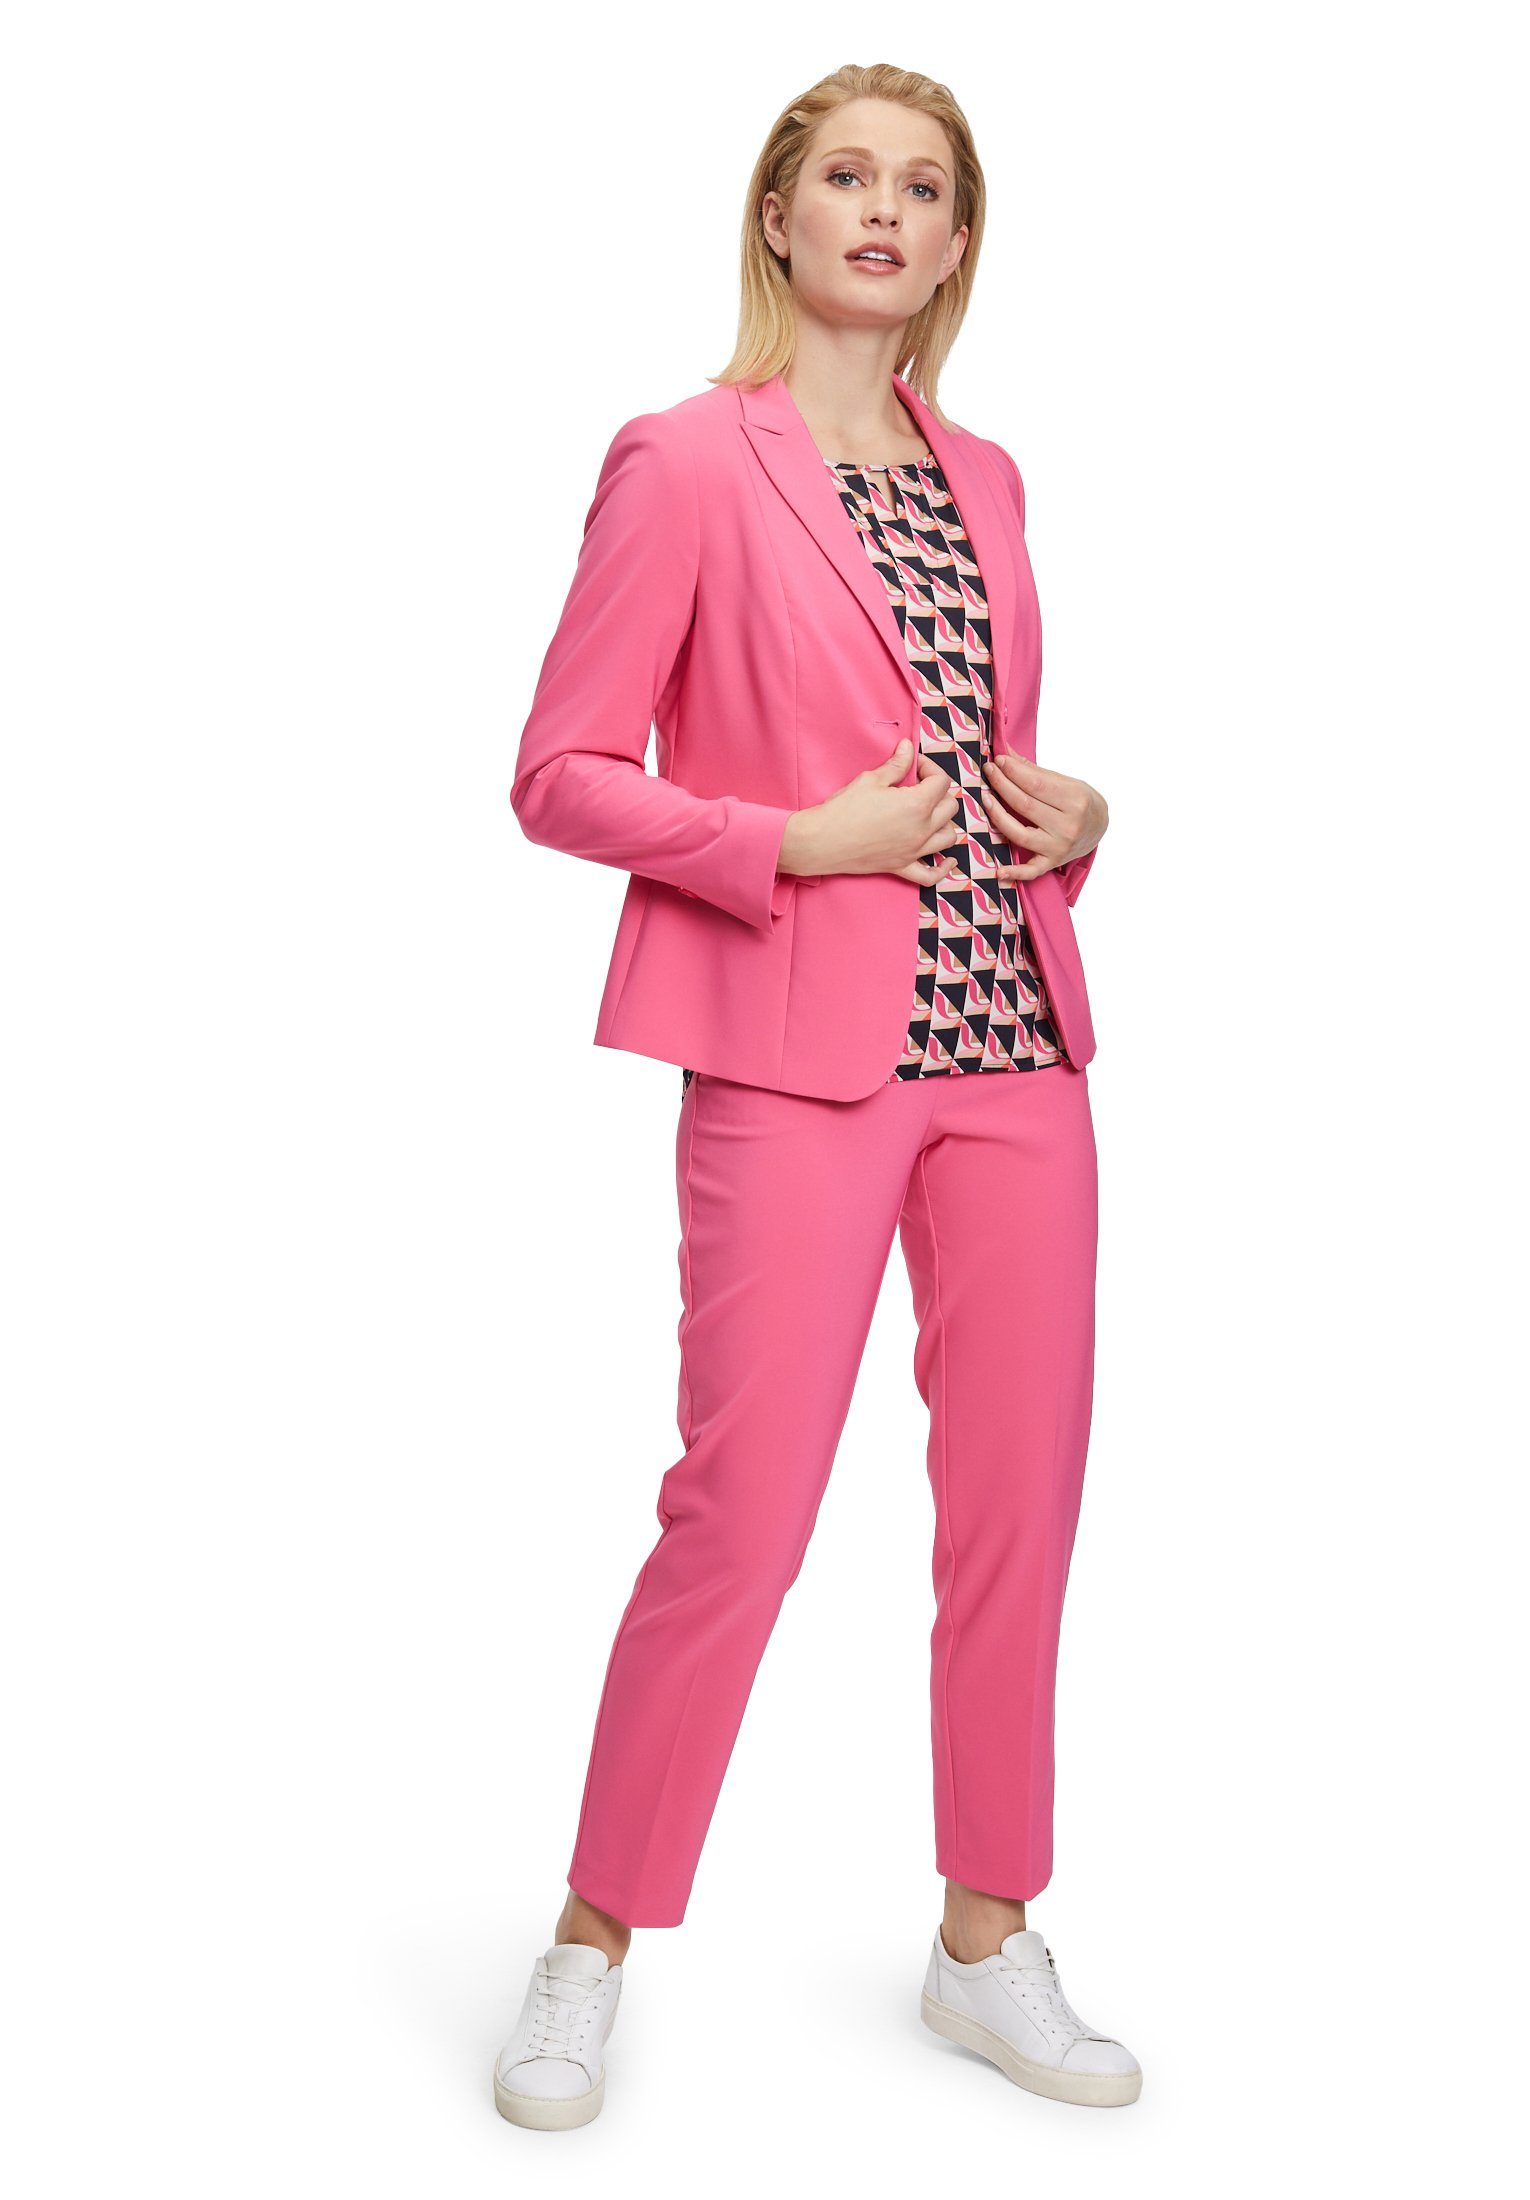 Betty Barclay Bluse Klassische Rosa Muster mit Muster